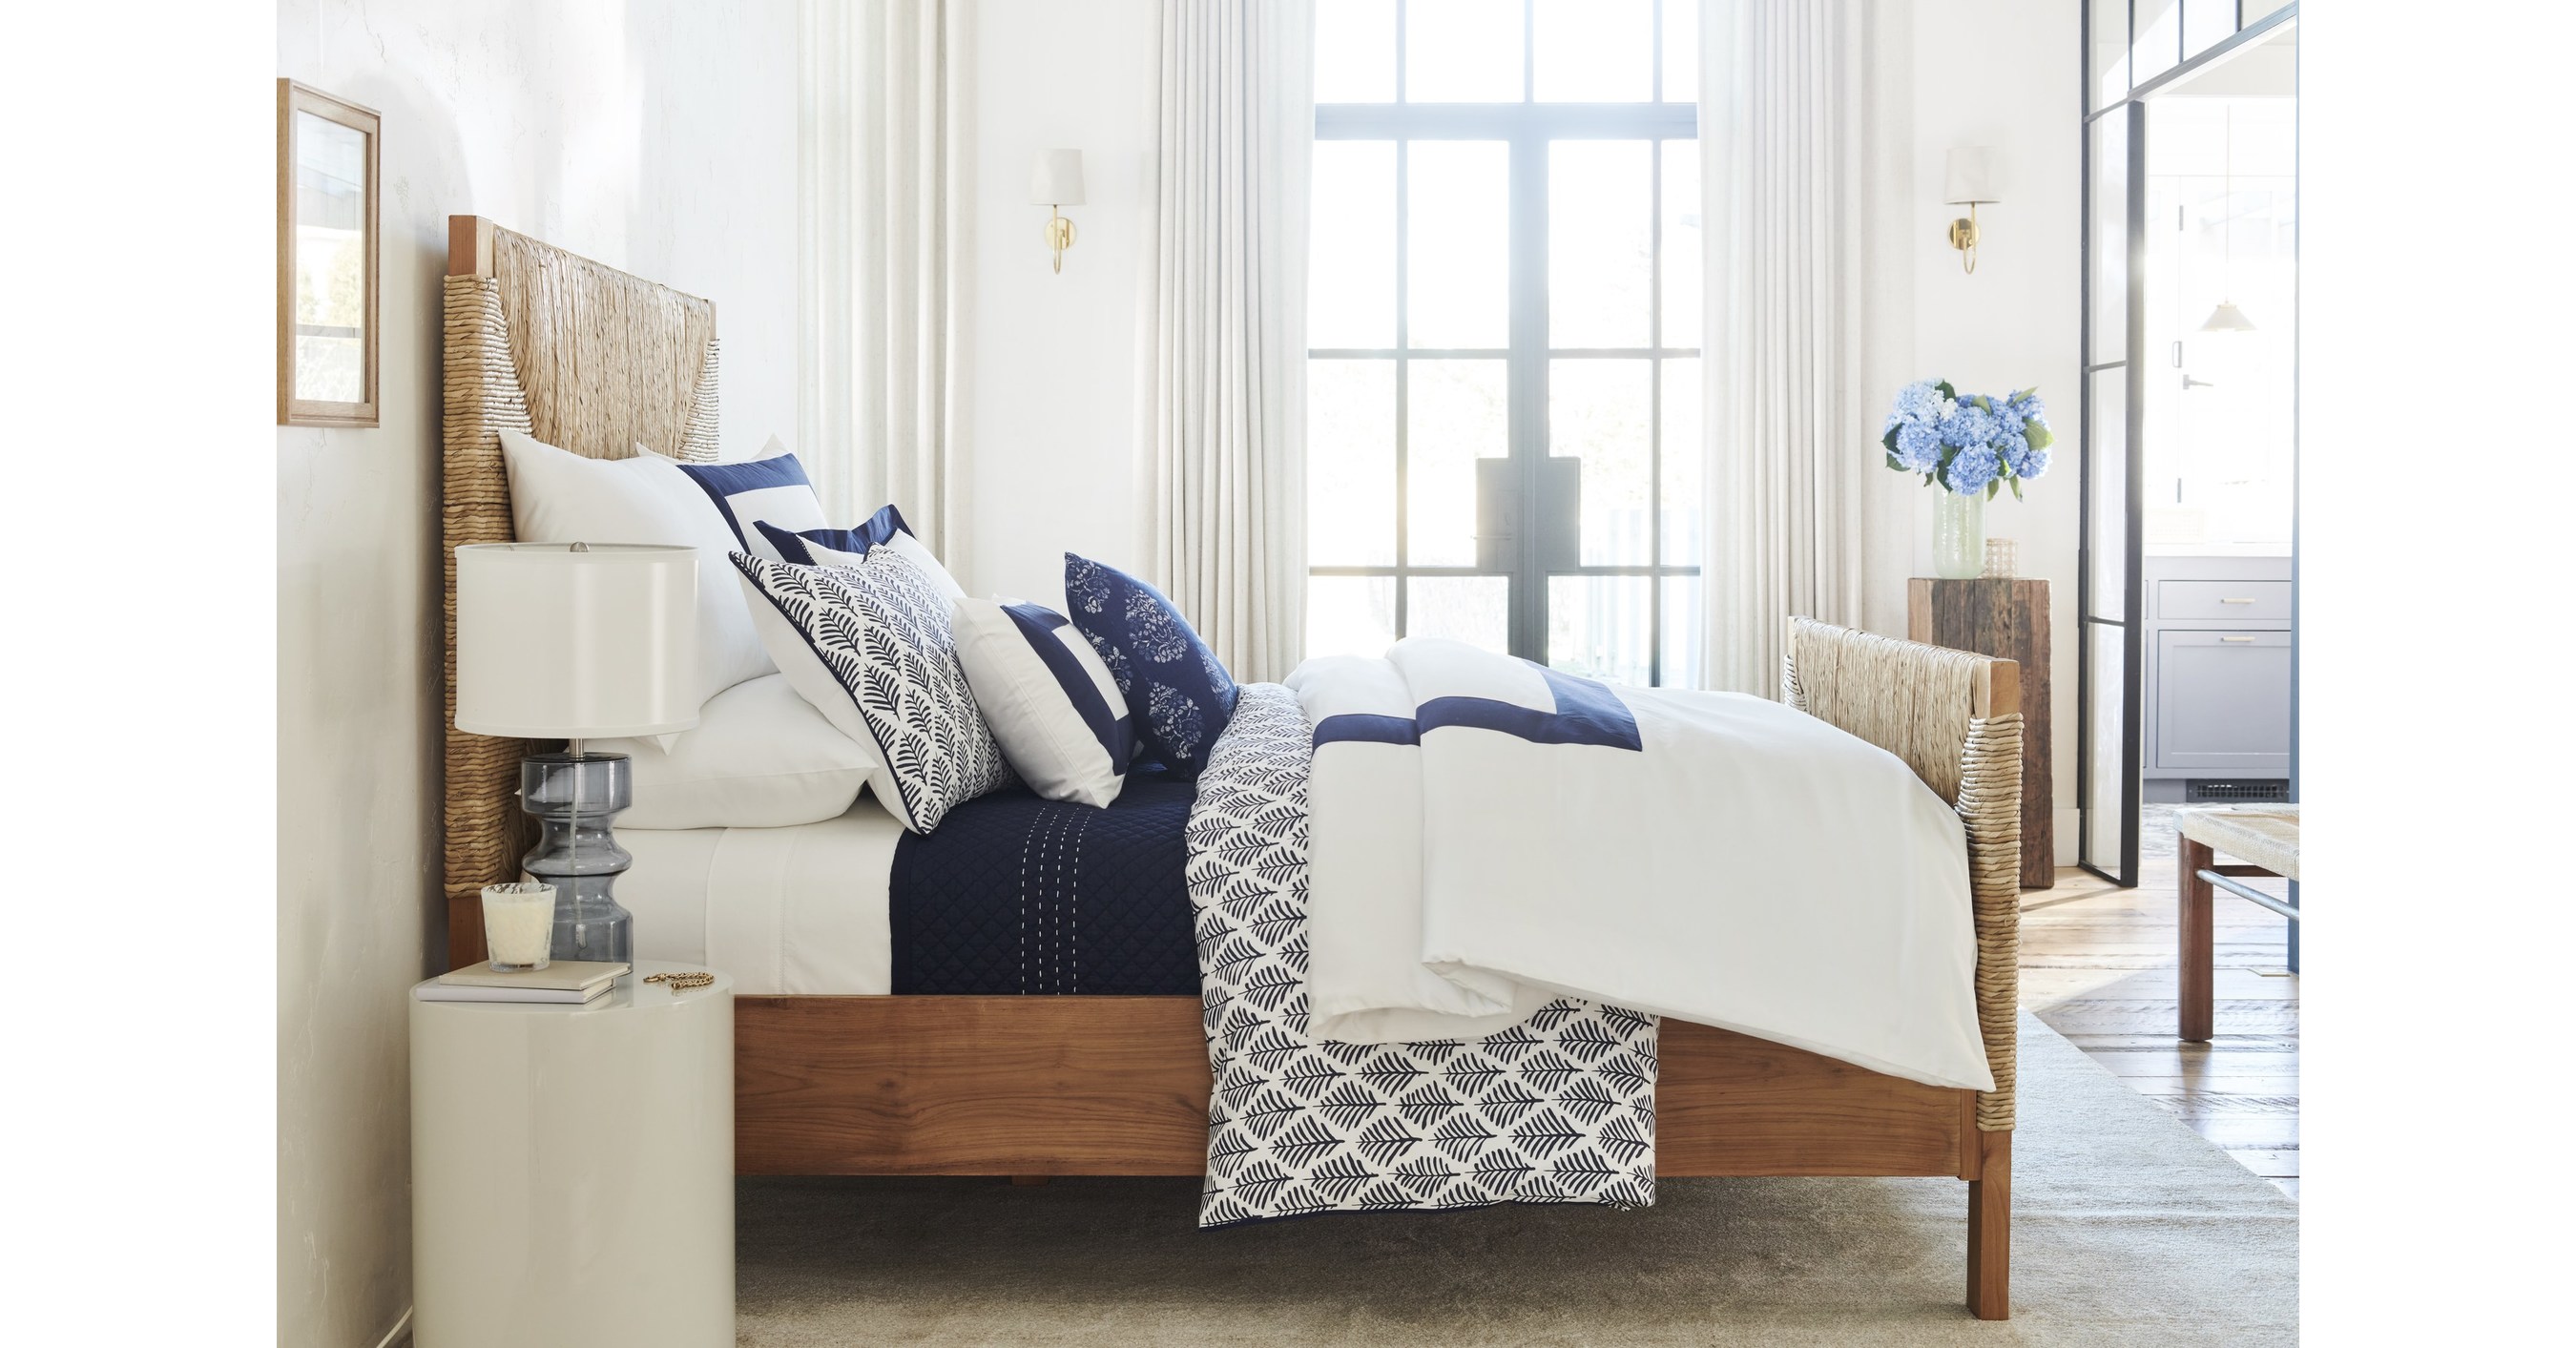 Bed Bath Beyond Launches Everhome For Every Home